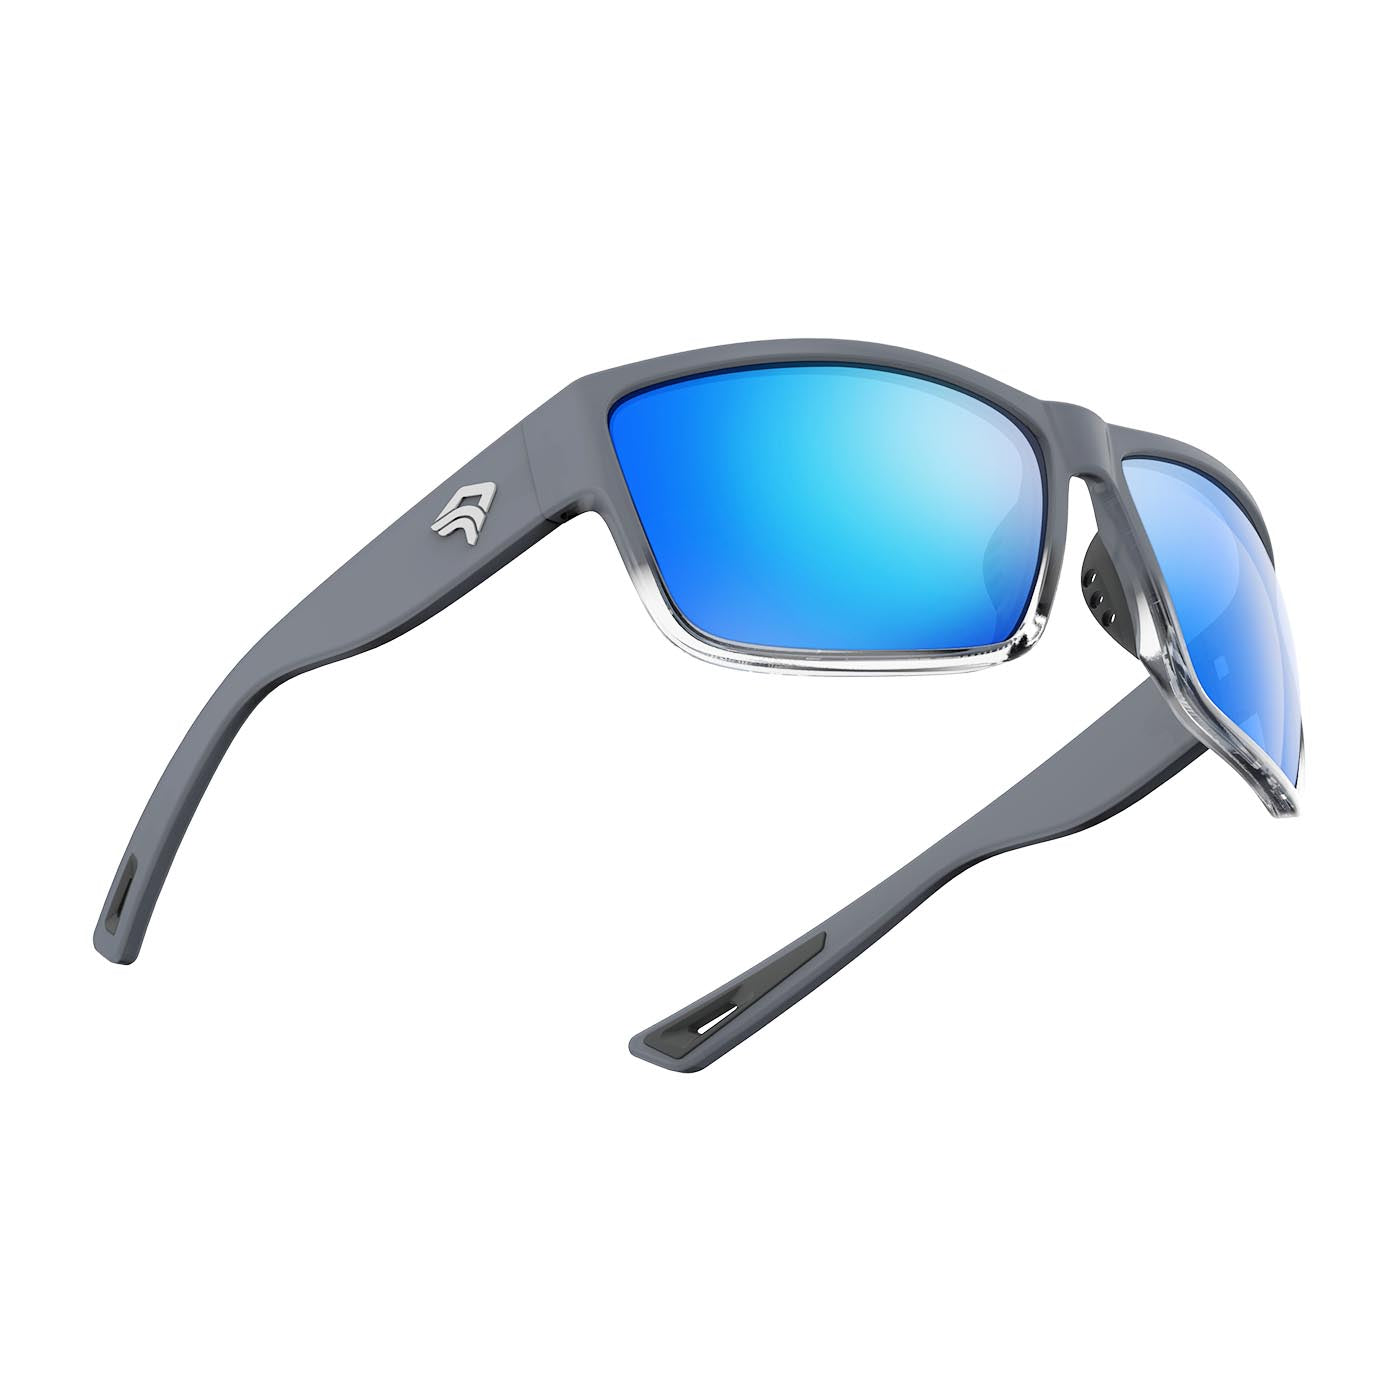 for Ideal Ideal - Pure Women Frame and and - Cycling, To Men Running, Matte and Flexible Lifetime Grey Transparent - Fishing Warranty with Adjustable Golf, Polarized Half Sunglasses for - Sports